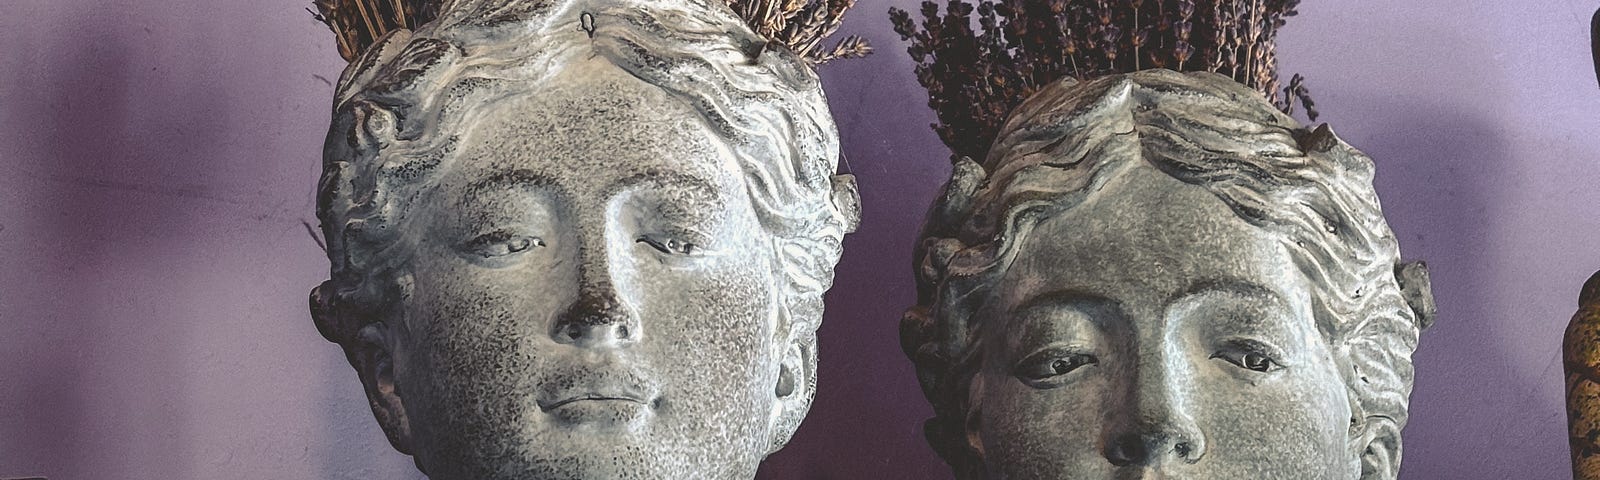 Two stone vases shaped as life sized, Grecian sculptures of women’s heads filled with drief lavendar set against a lilac wall.